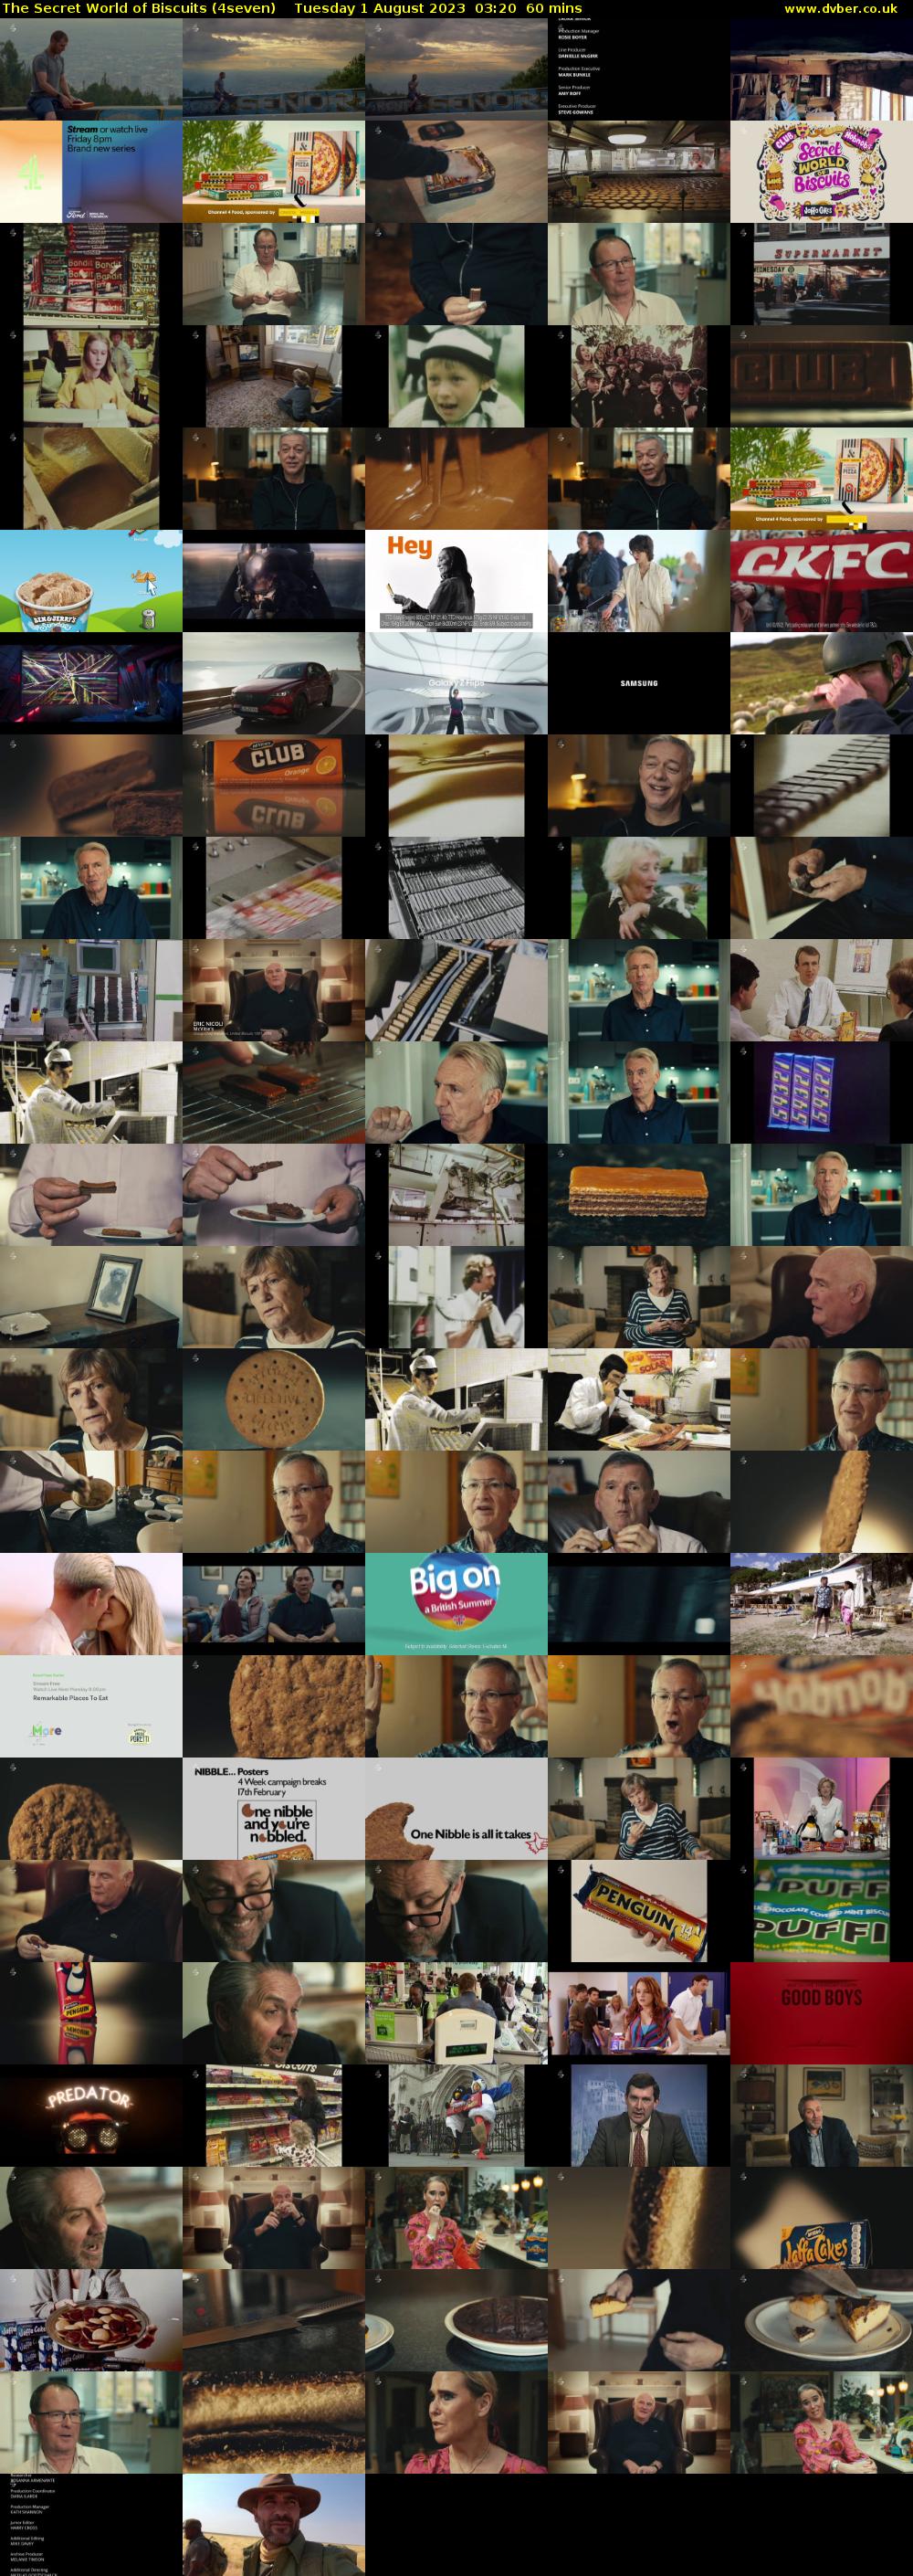 The Secret World of Biscuits (4seven) Tuesday 1 August 2023 03:20 - 04:20